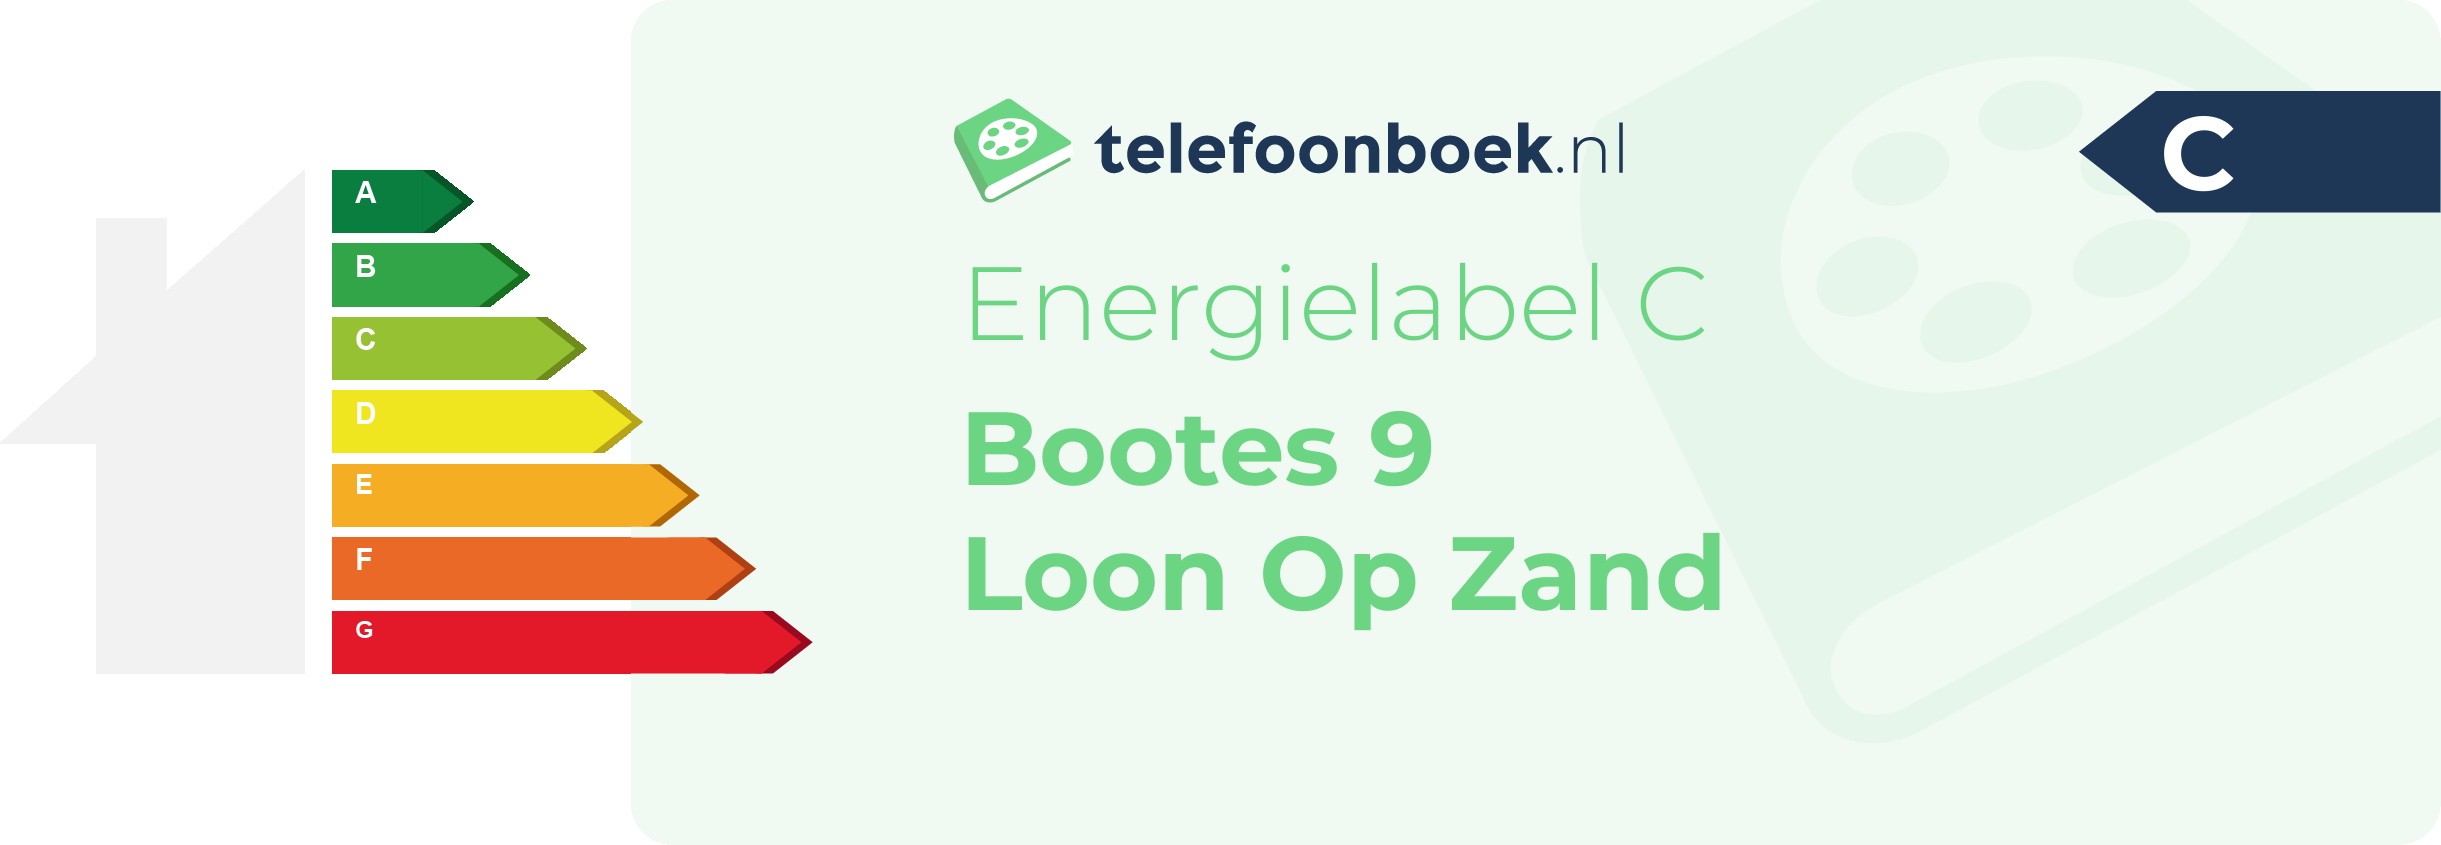 Energielabel Bootes 9 Loon Op Zand